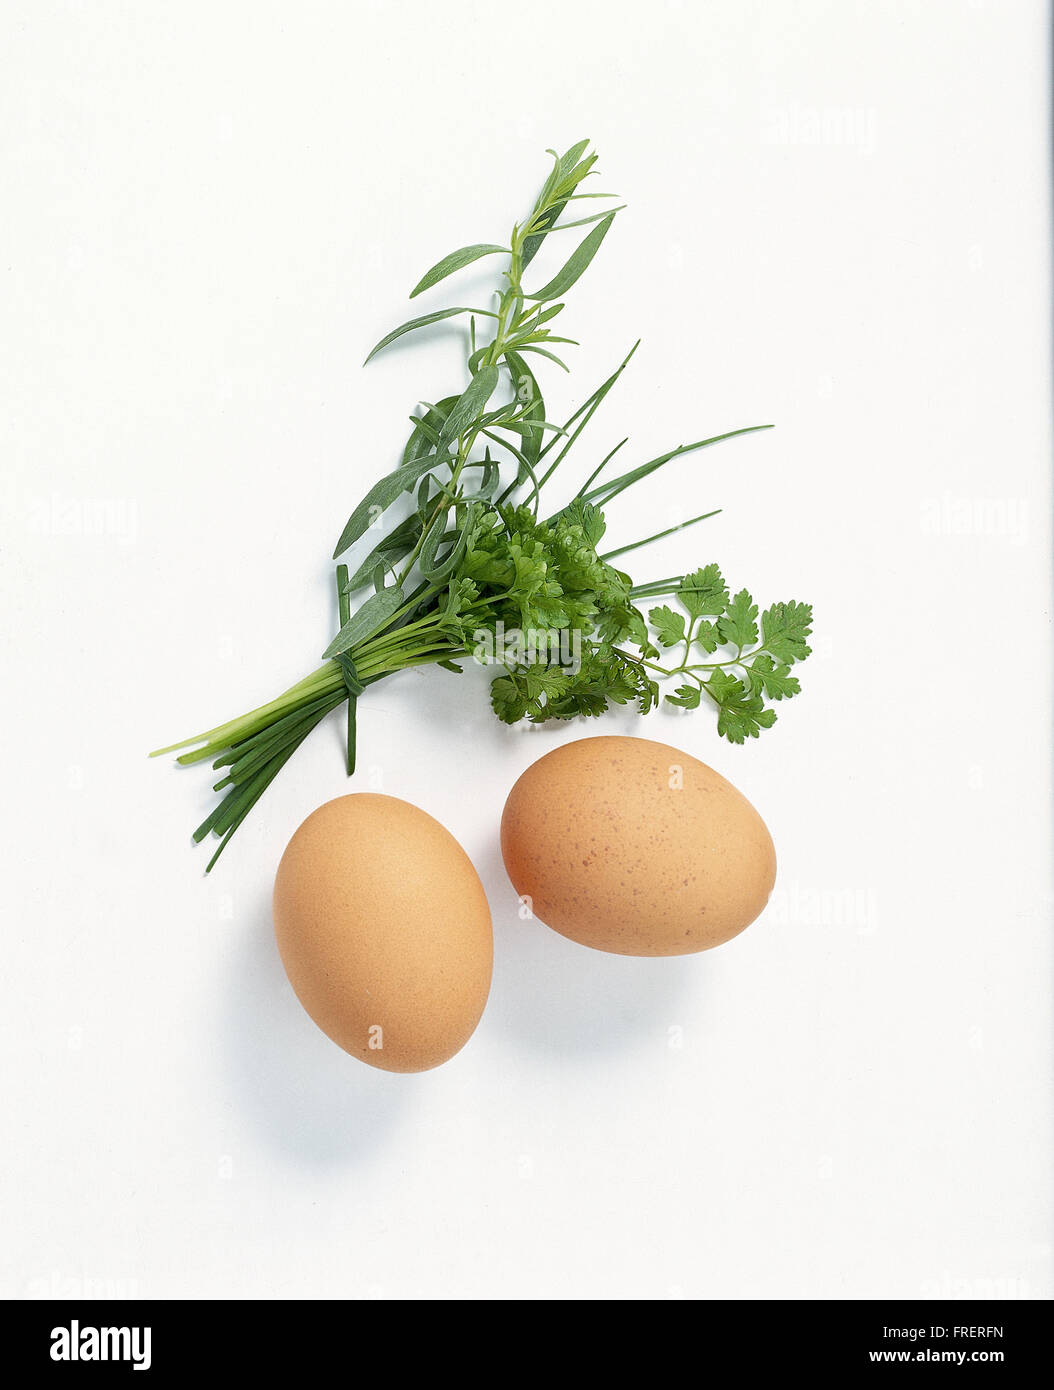 Classic french omelette: Two whole eggs beside a bunch of fresh herbs Stock Photo